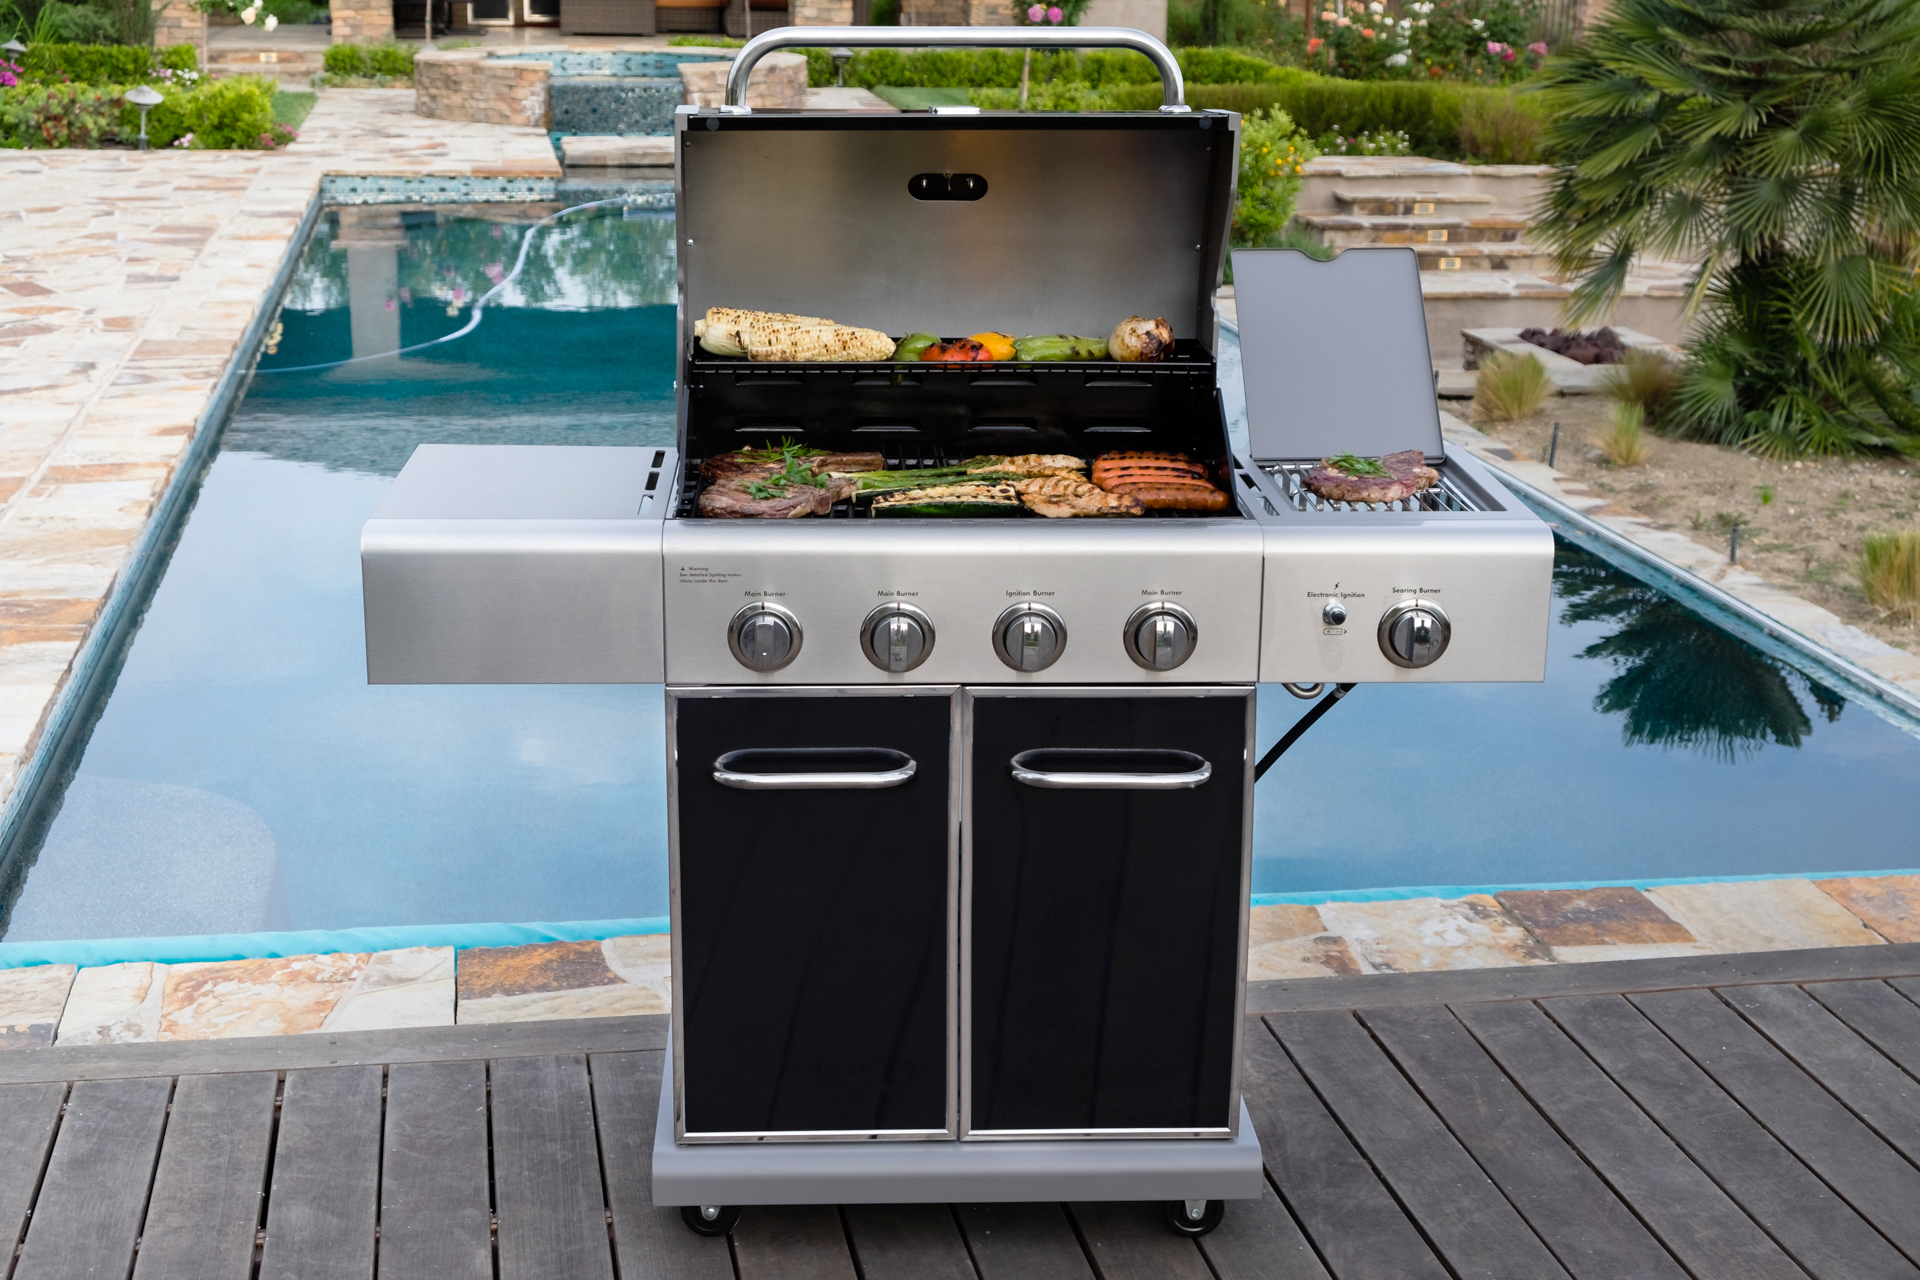 Kenmore 4-Burner Outdoor Propane Gas Grill with Searing Side Burner, Stainless Steel with Black Trim - image 2 of 8